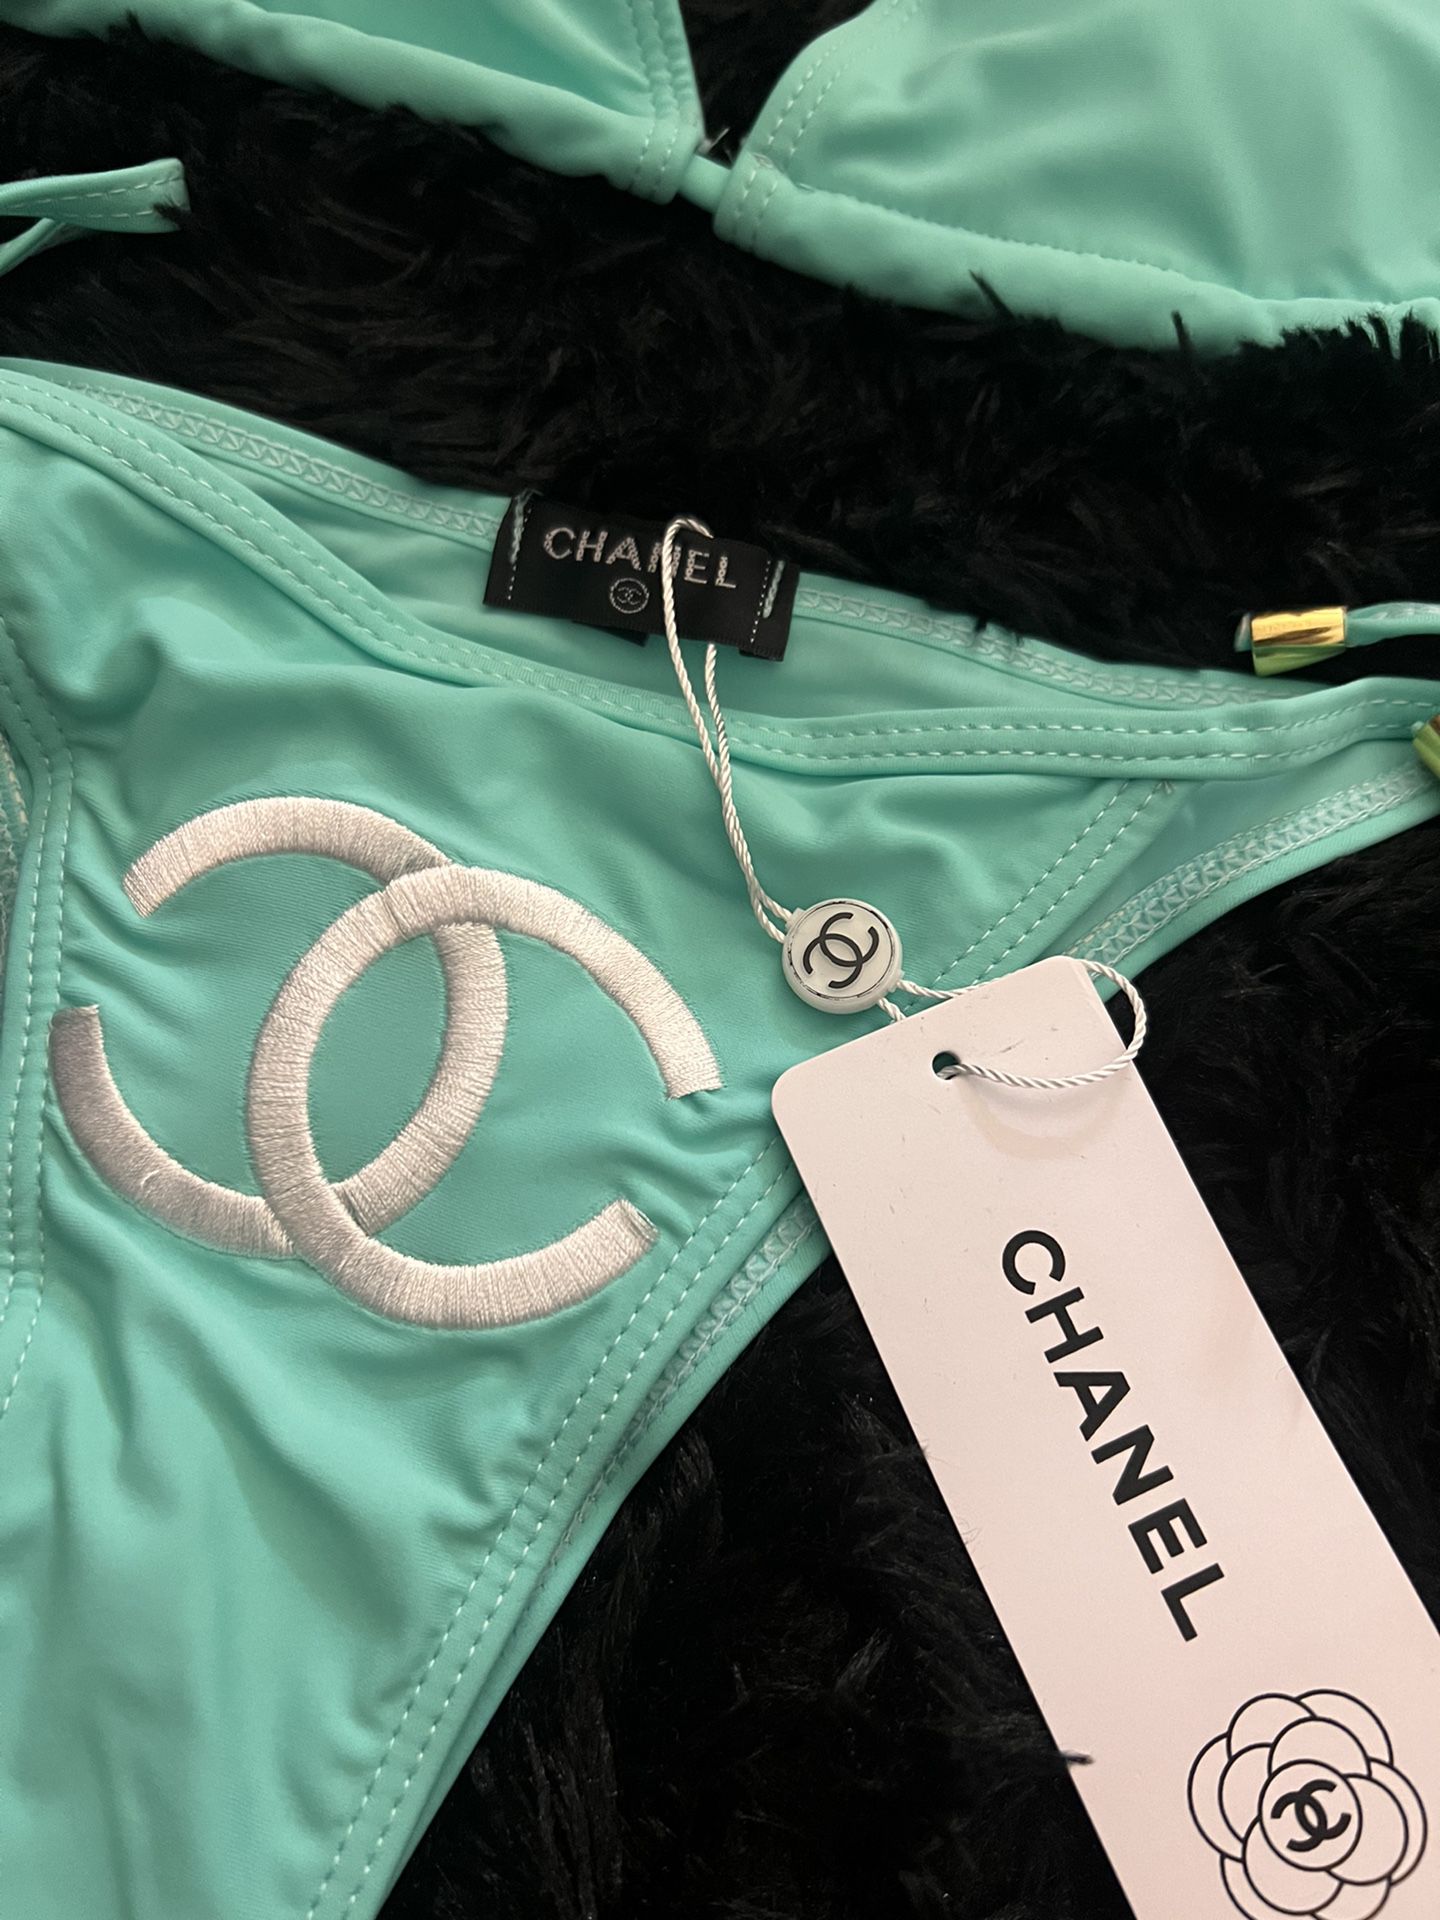 CHANEL Bathing Suits New for Sale in Rosemead, CA - OfferUp